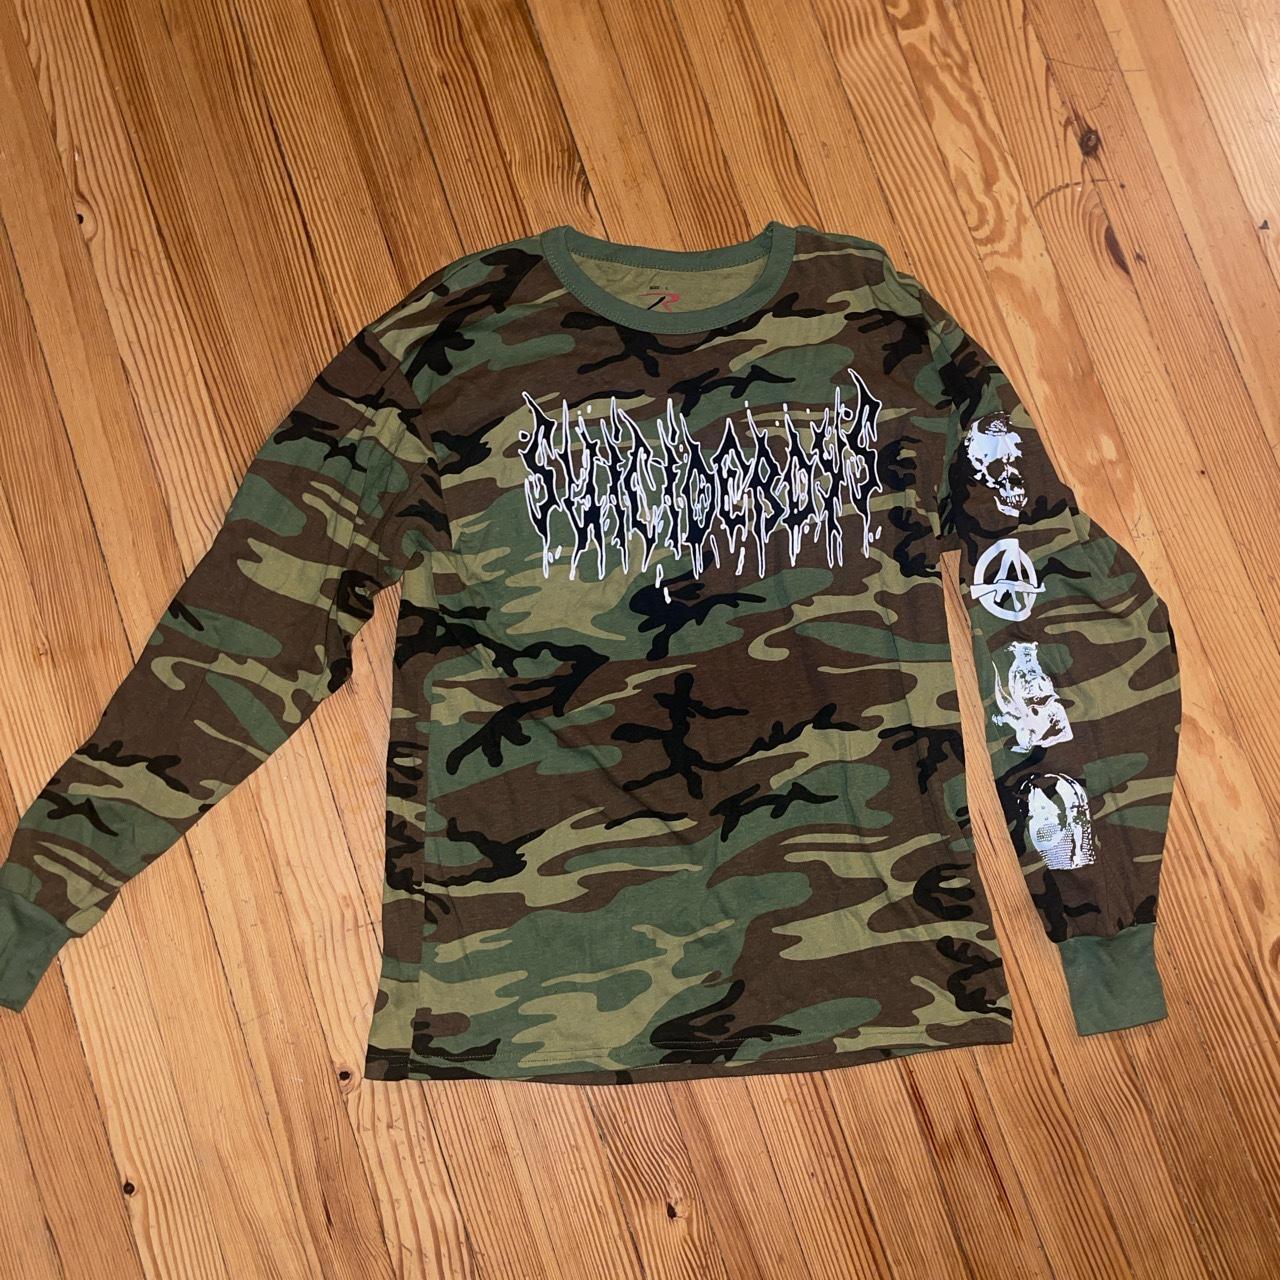 Camo Suicide Boys Merch from G59 Tour. Purchased at... - Depop